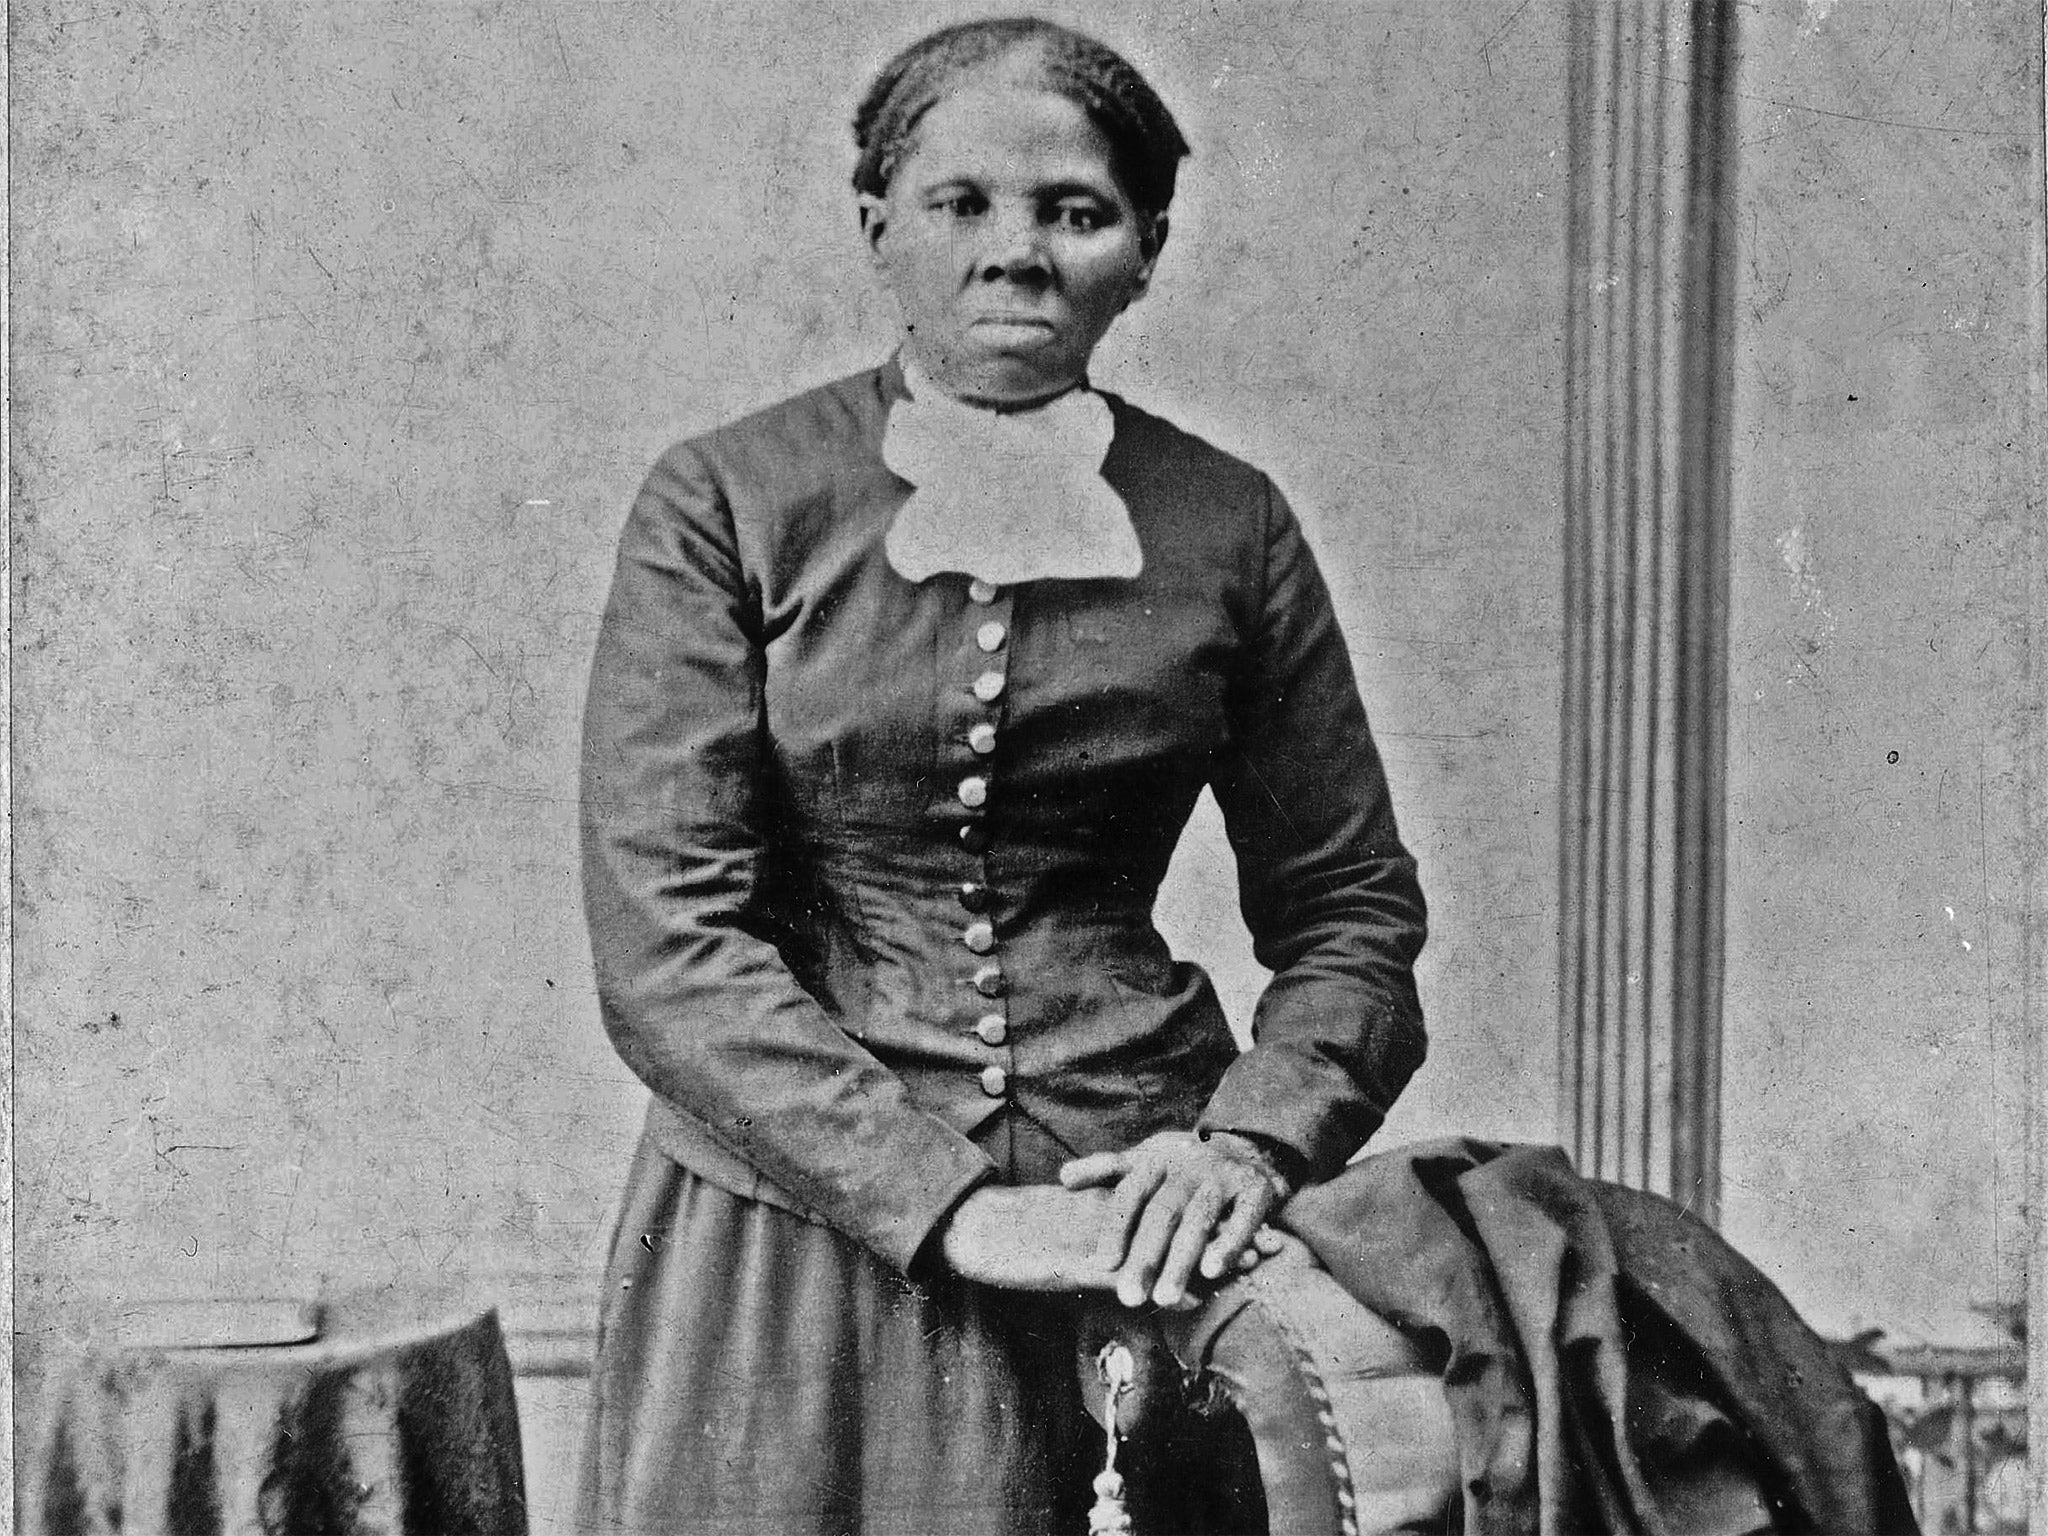 Harriet Tubman in a photograph dating from 1860-75. Her image proved the most popular in a public vote over historical figures to appear on US banknotes